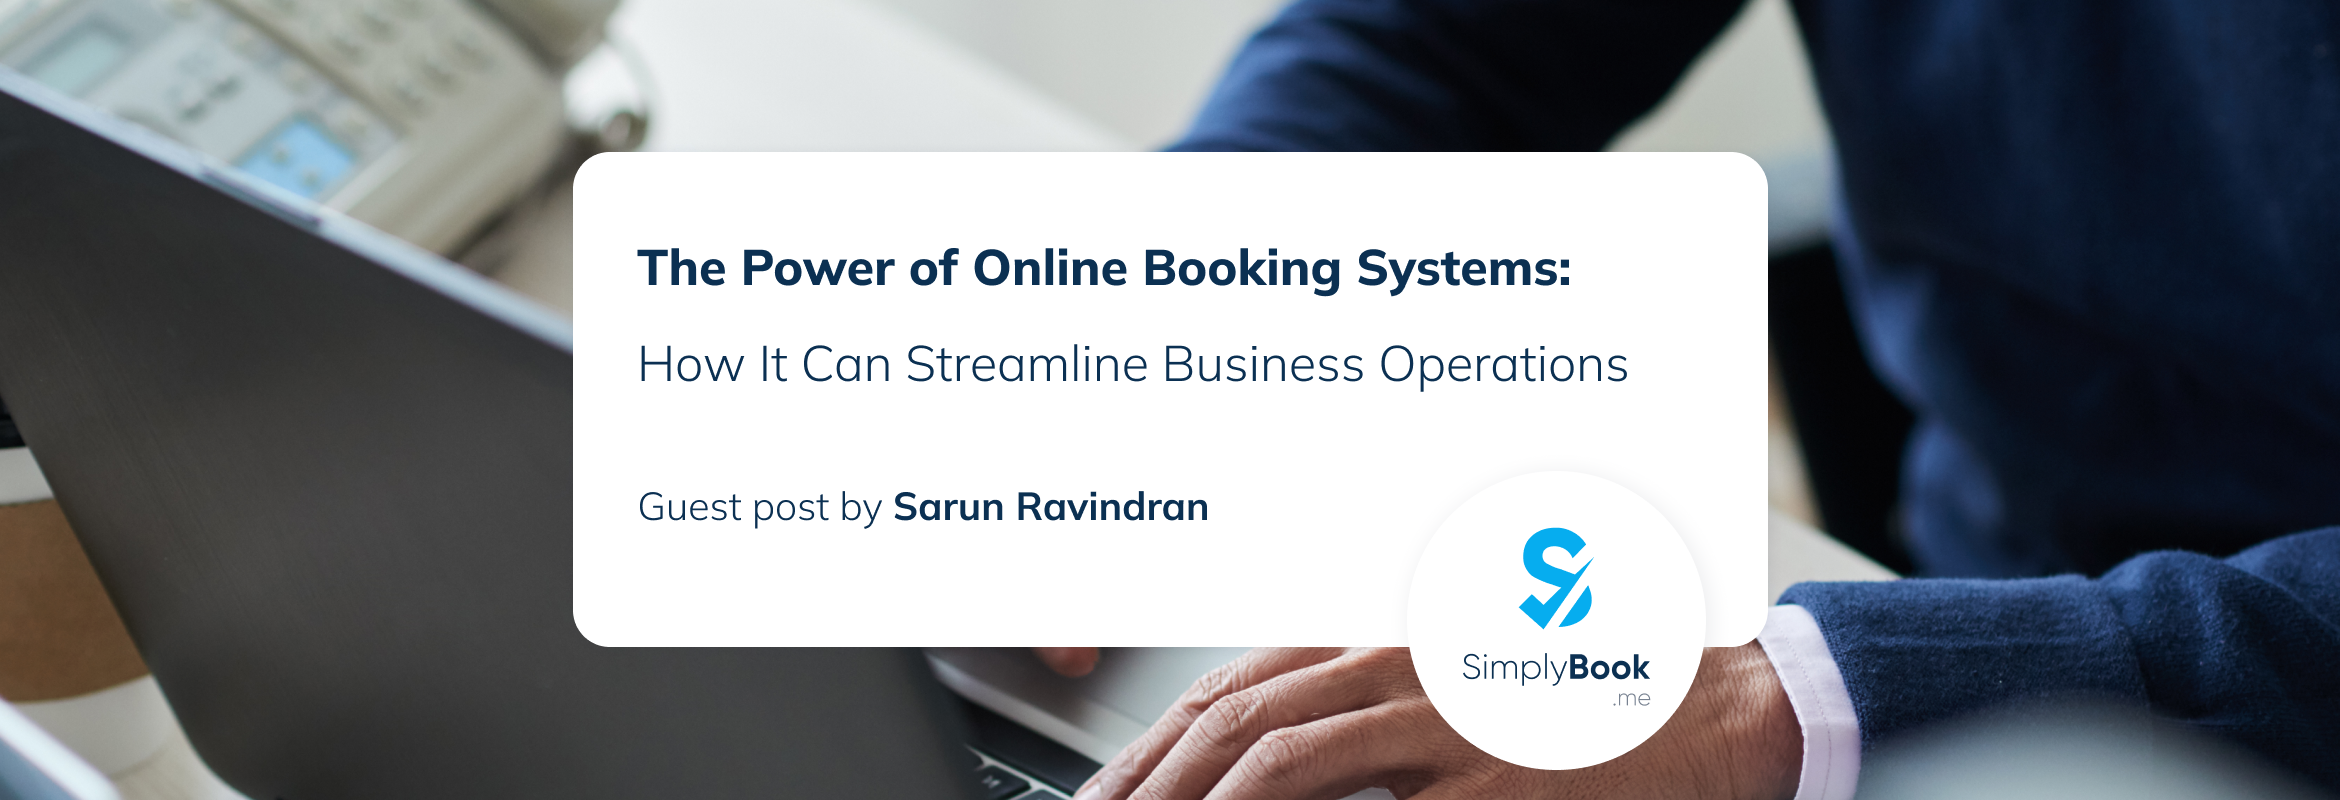 The power of online booking systems - Streamline your business operations